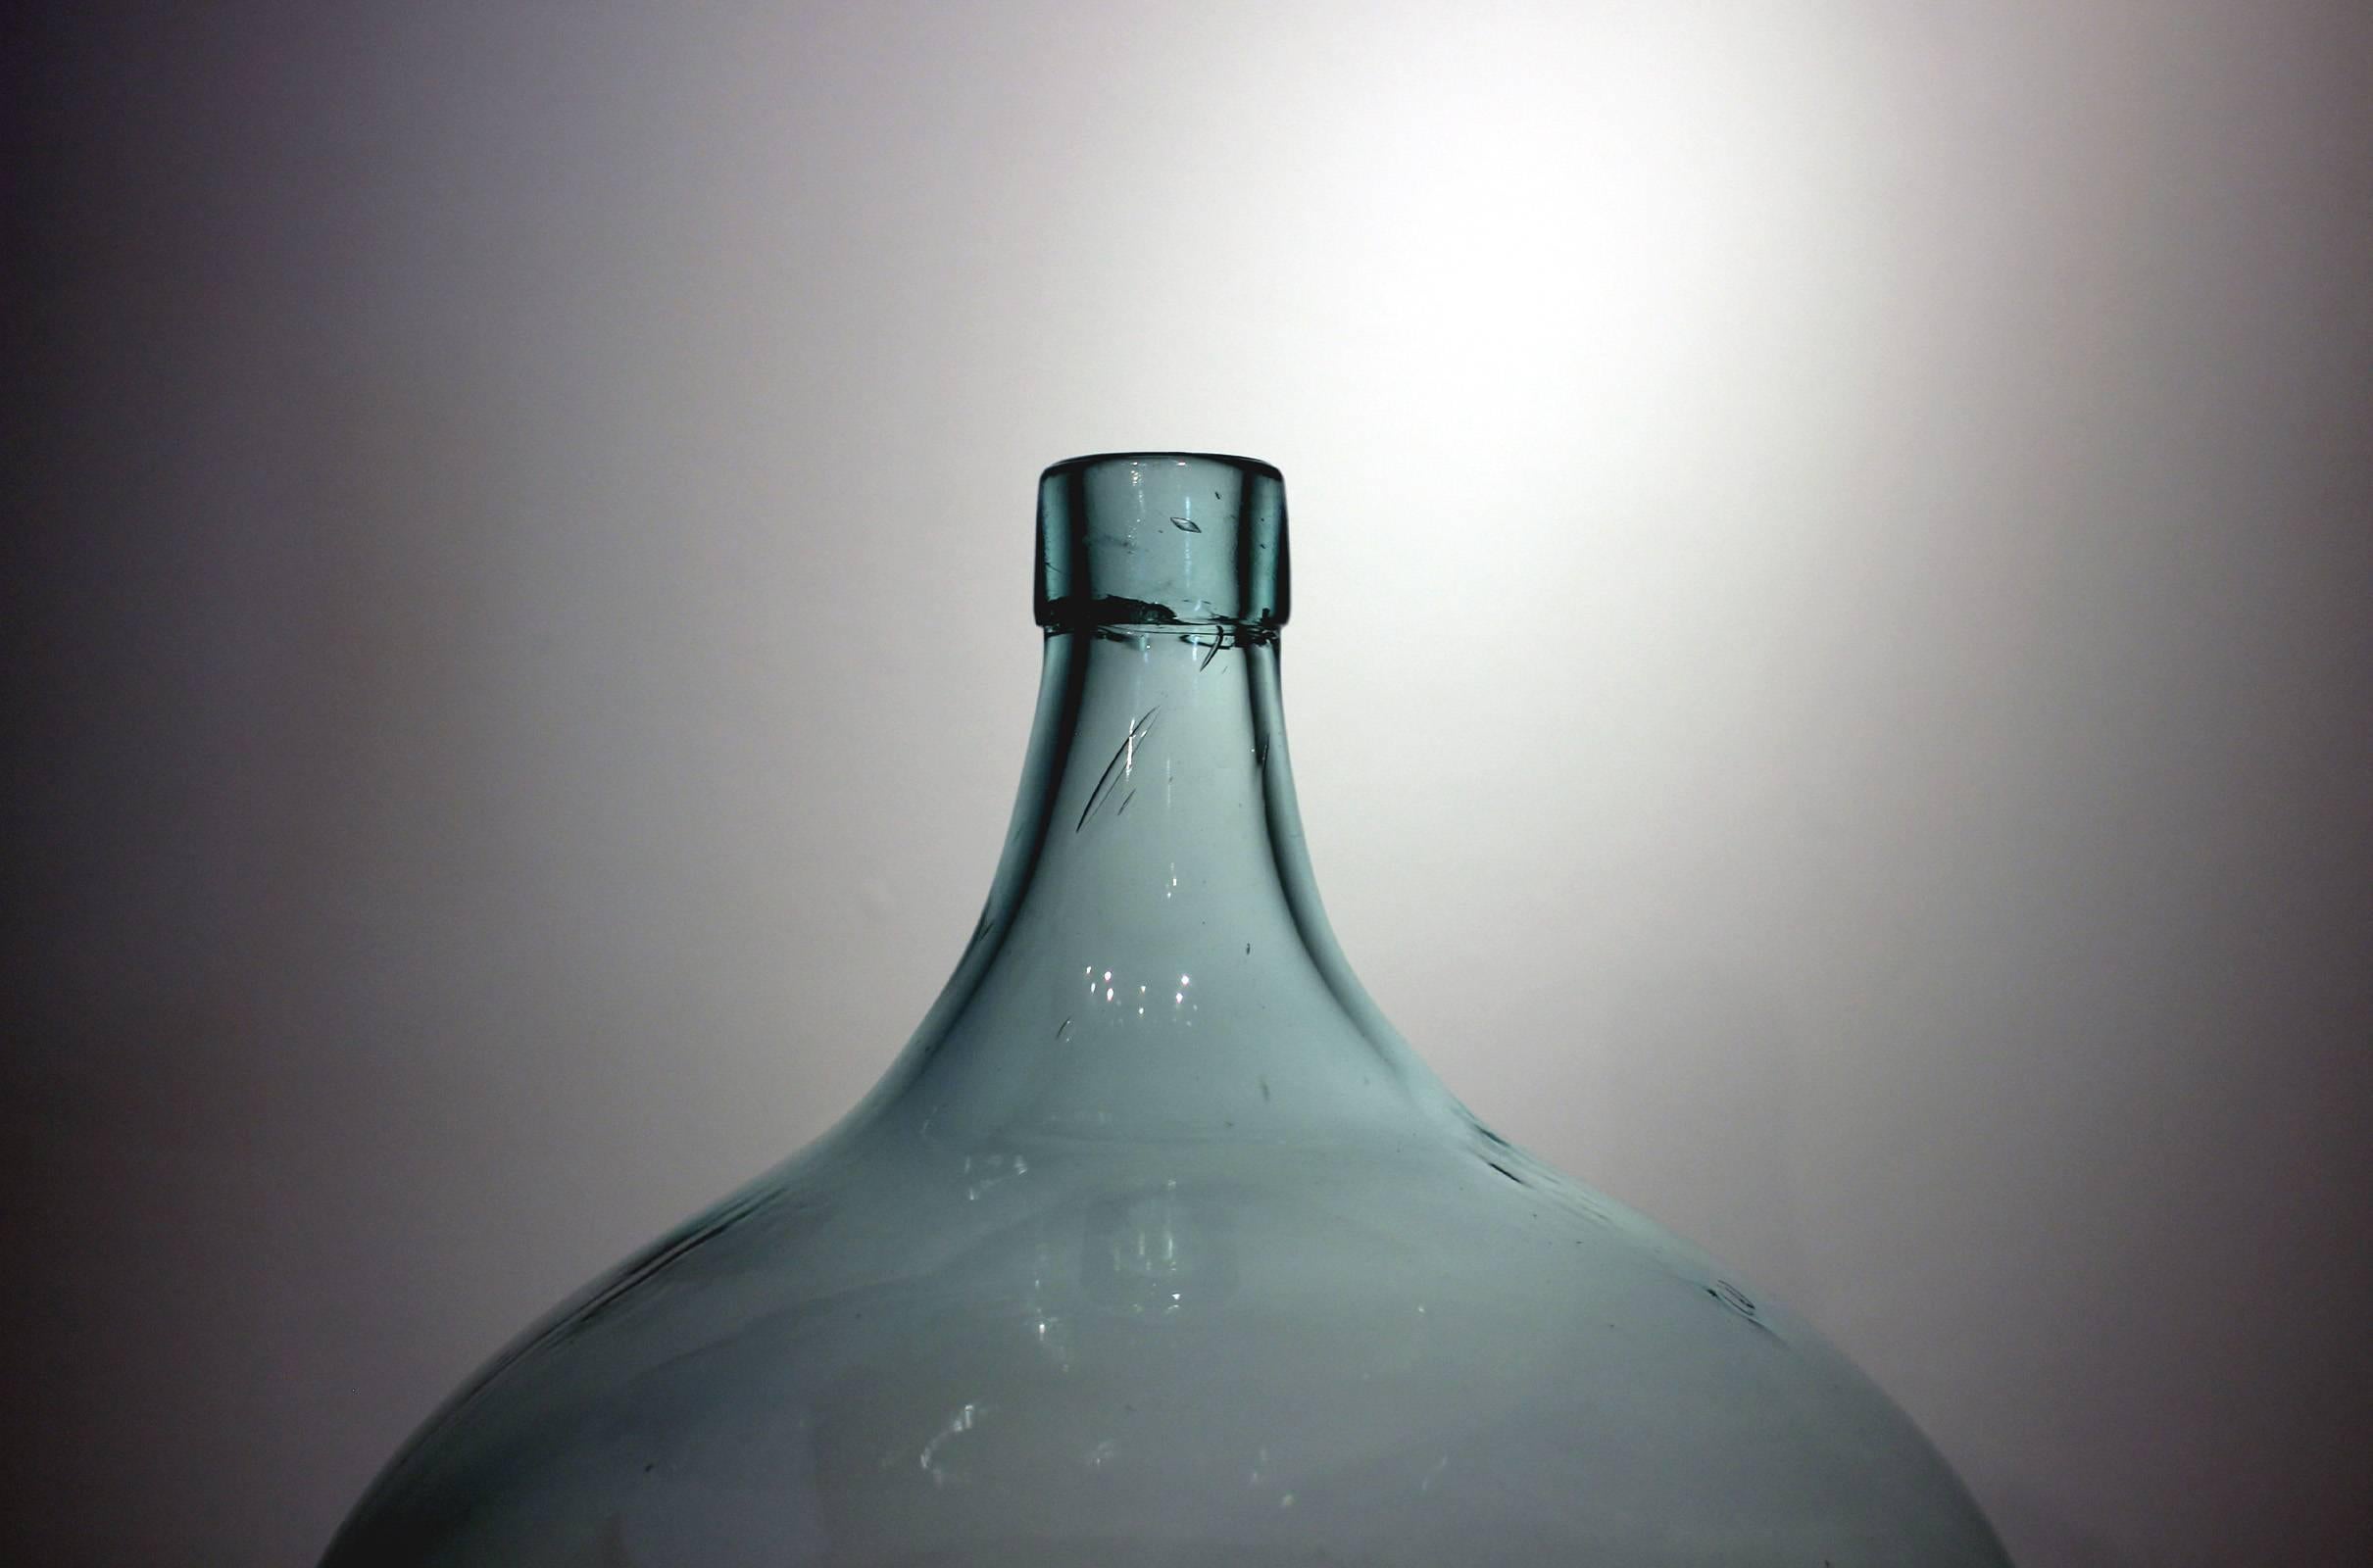 Large and beautifully formed aquamarine blown glass demijohn bottle, American, late 19th century. Excellent condition.